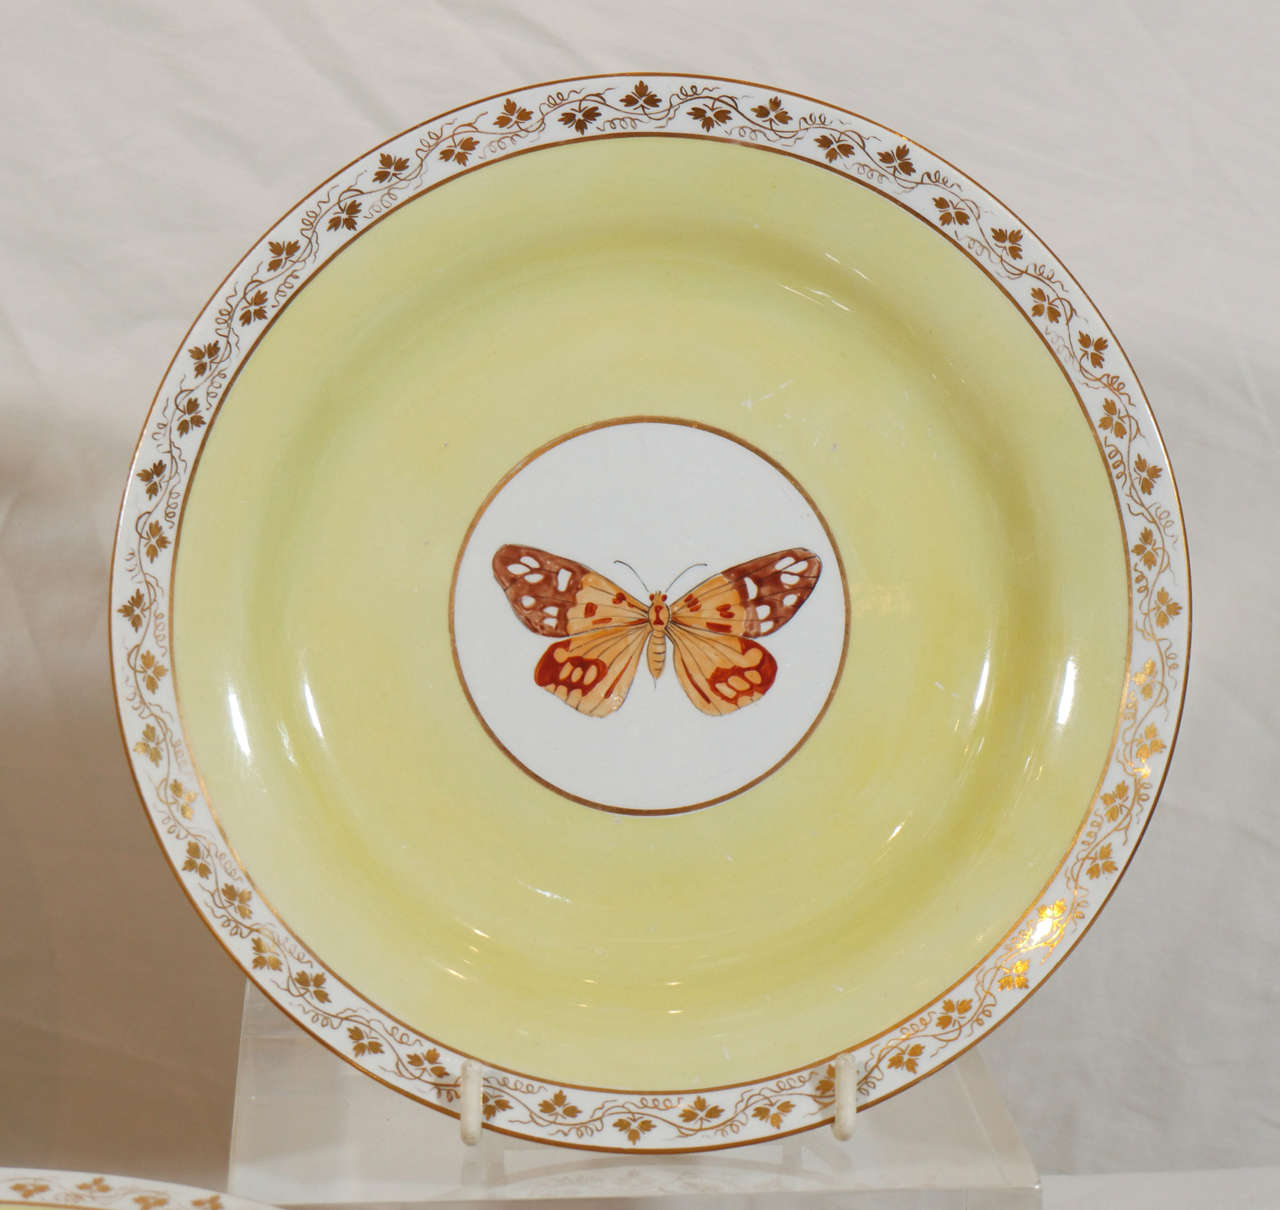 Regency Set of Ten Wedgwood Dishes with Butterflies